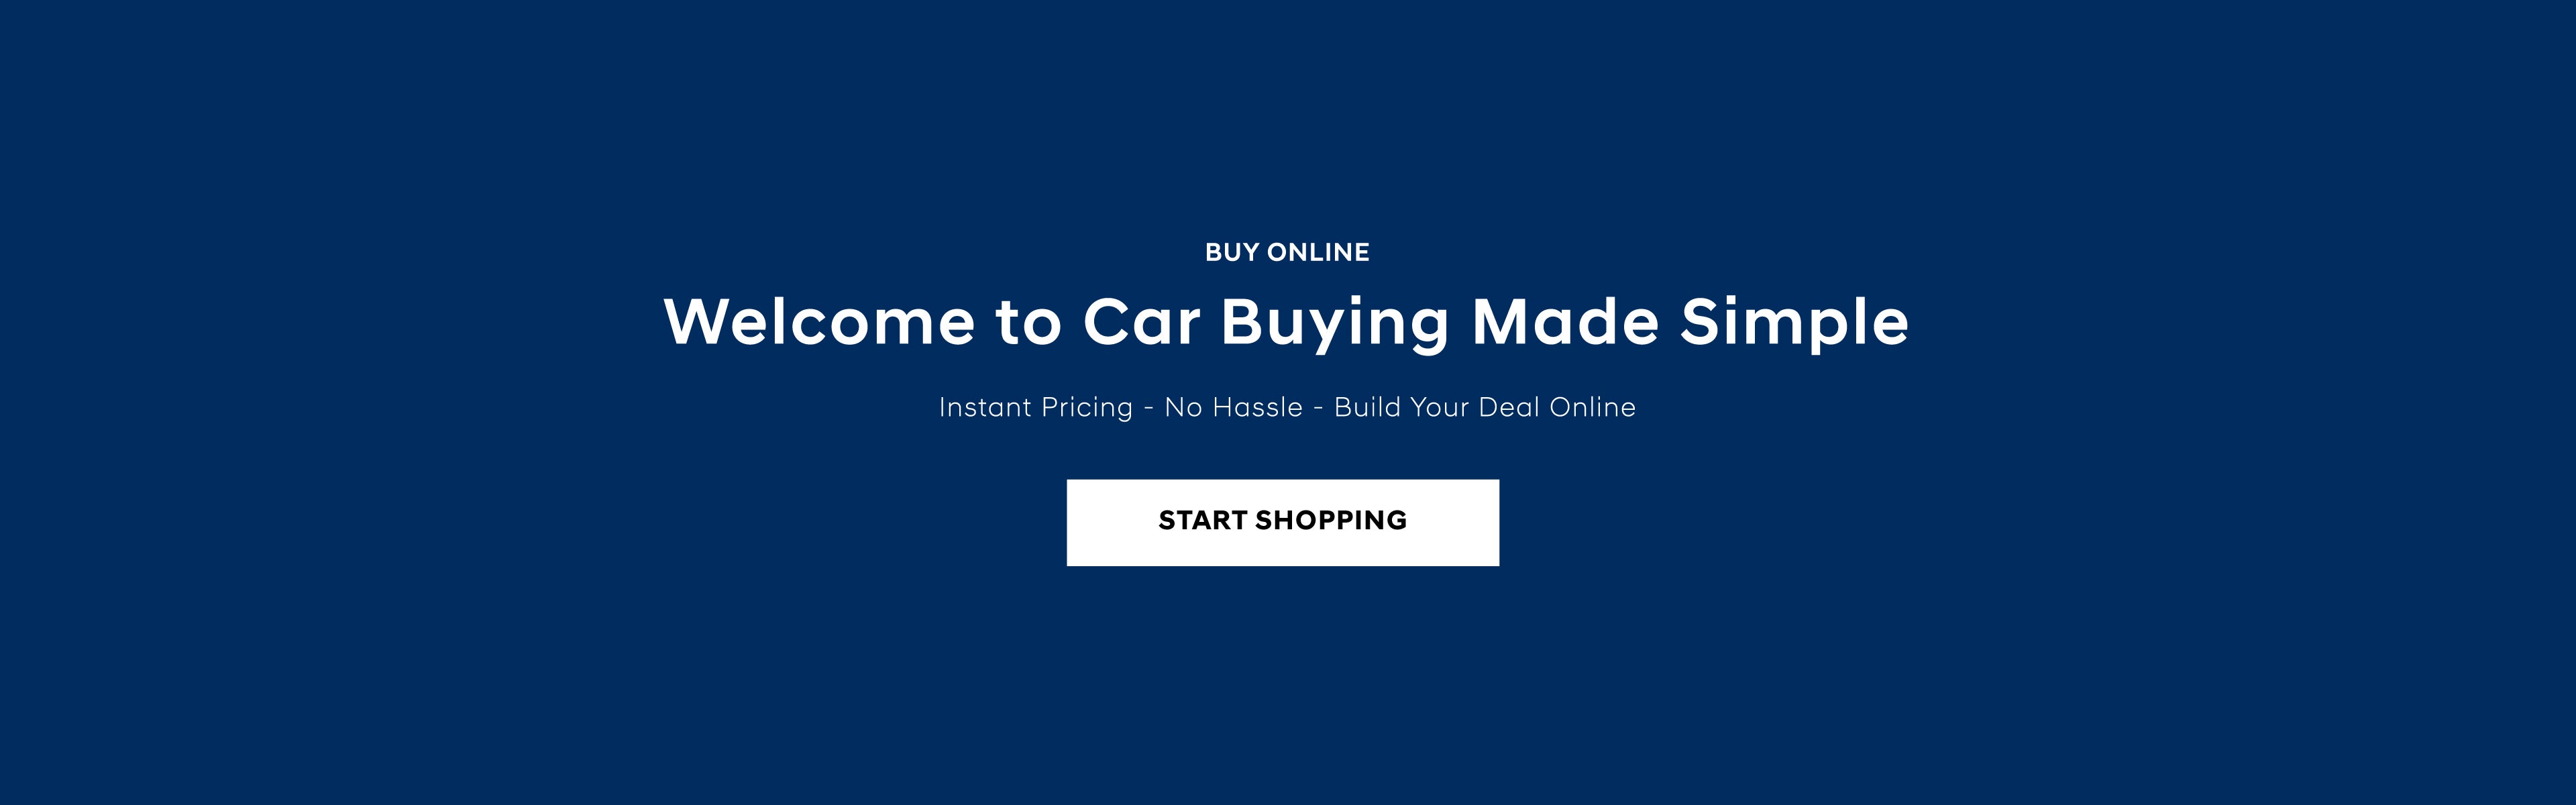 Roadster-Welcome To Car Buying Made Simple